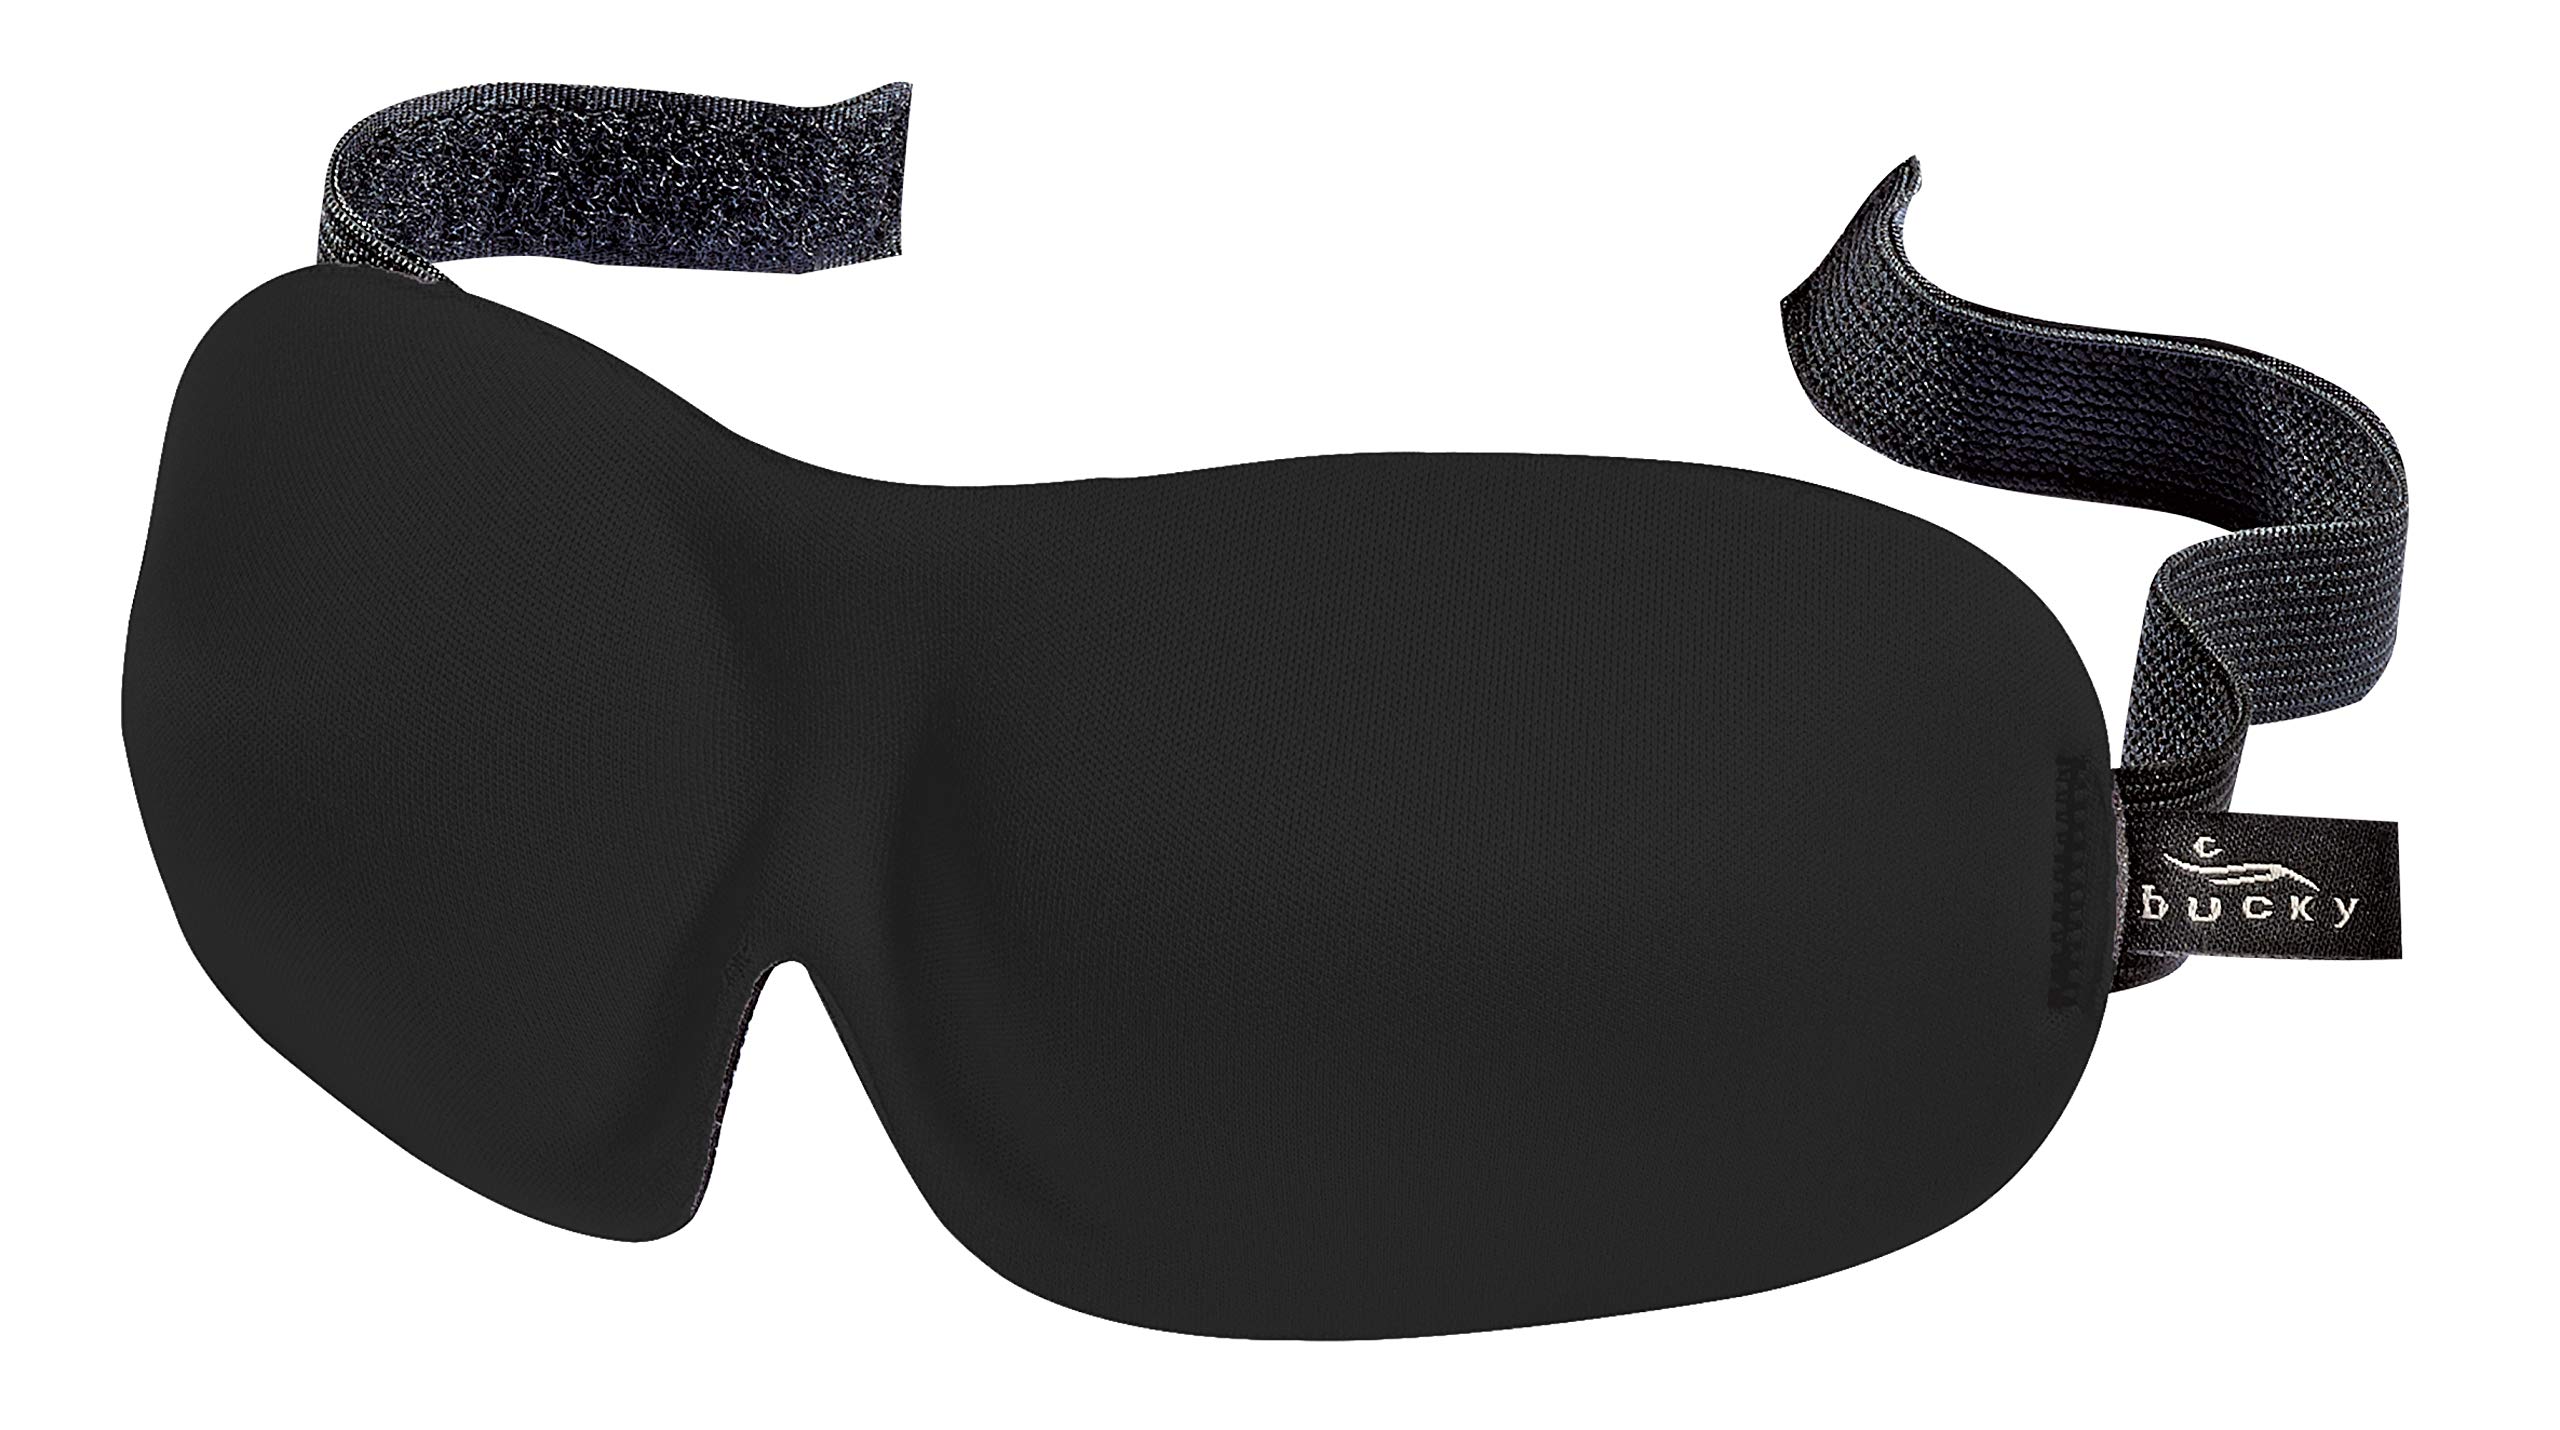 Best Sleep Masks For Blocking Light From Your Eyes 2021